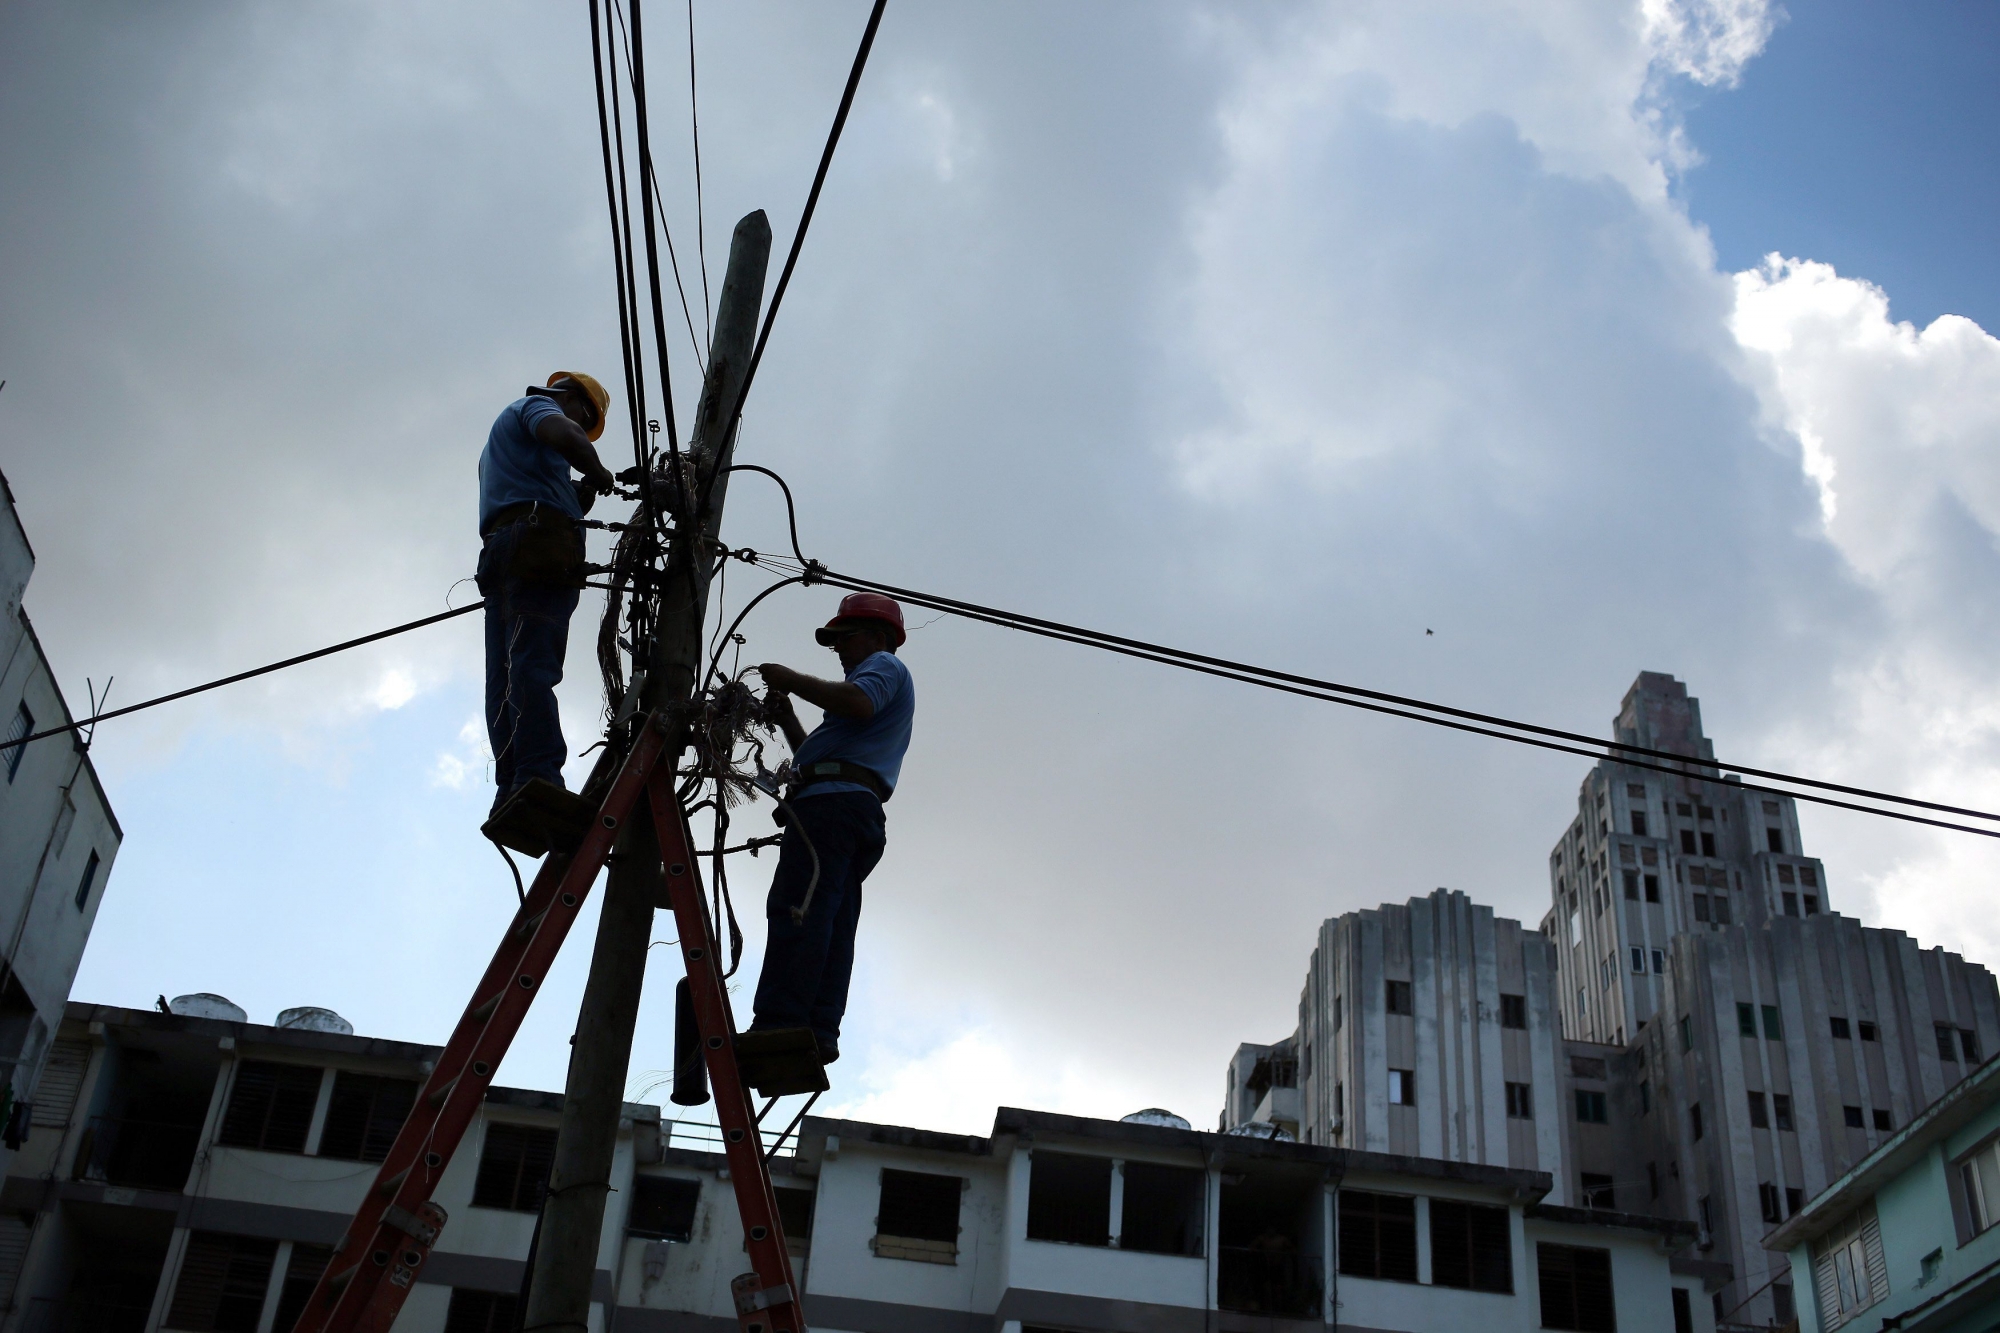 epa06202671 Company workers repair electricity lines damaged by the Hurricane Irma in Havana, Cuba, 13 September 2017. According to official reports, 4288 houses were affected by floodings triggered by the hurricane Irma, with 157 completely damaged and 986 partially.  EPA/ALEJANDRO ERNESTO CUBA HURRICANE IRMA AFTERMATH